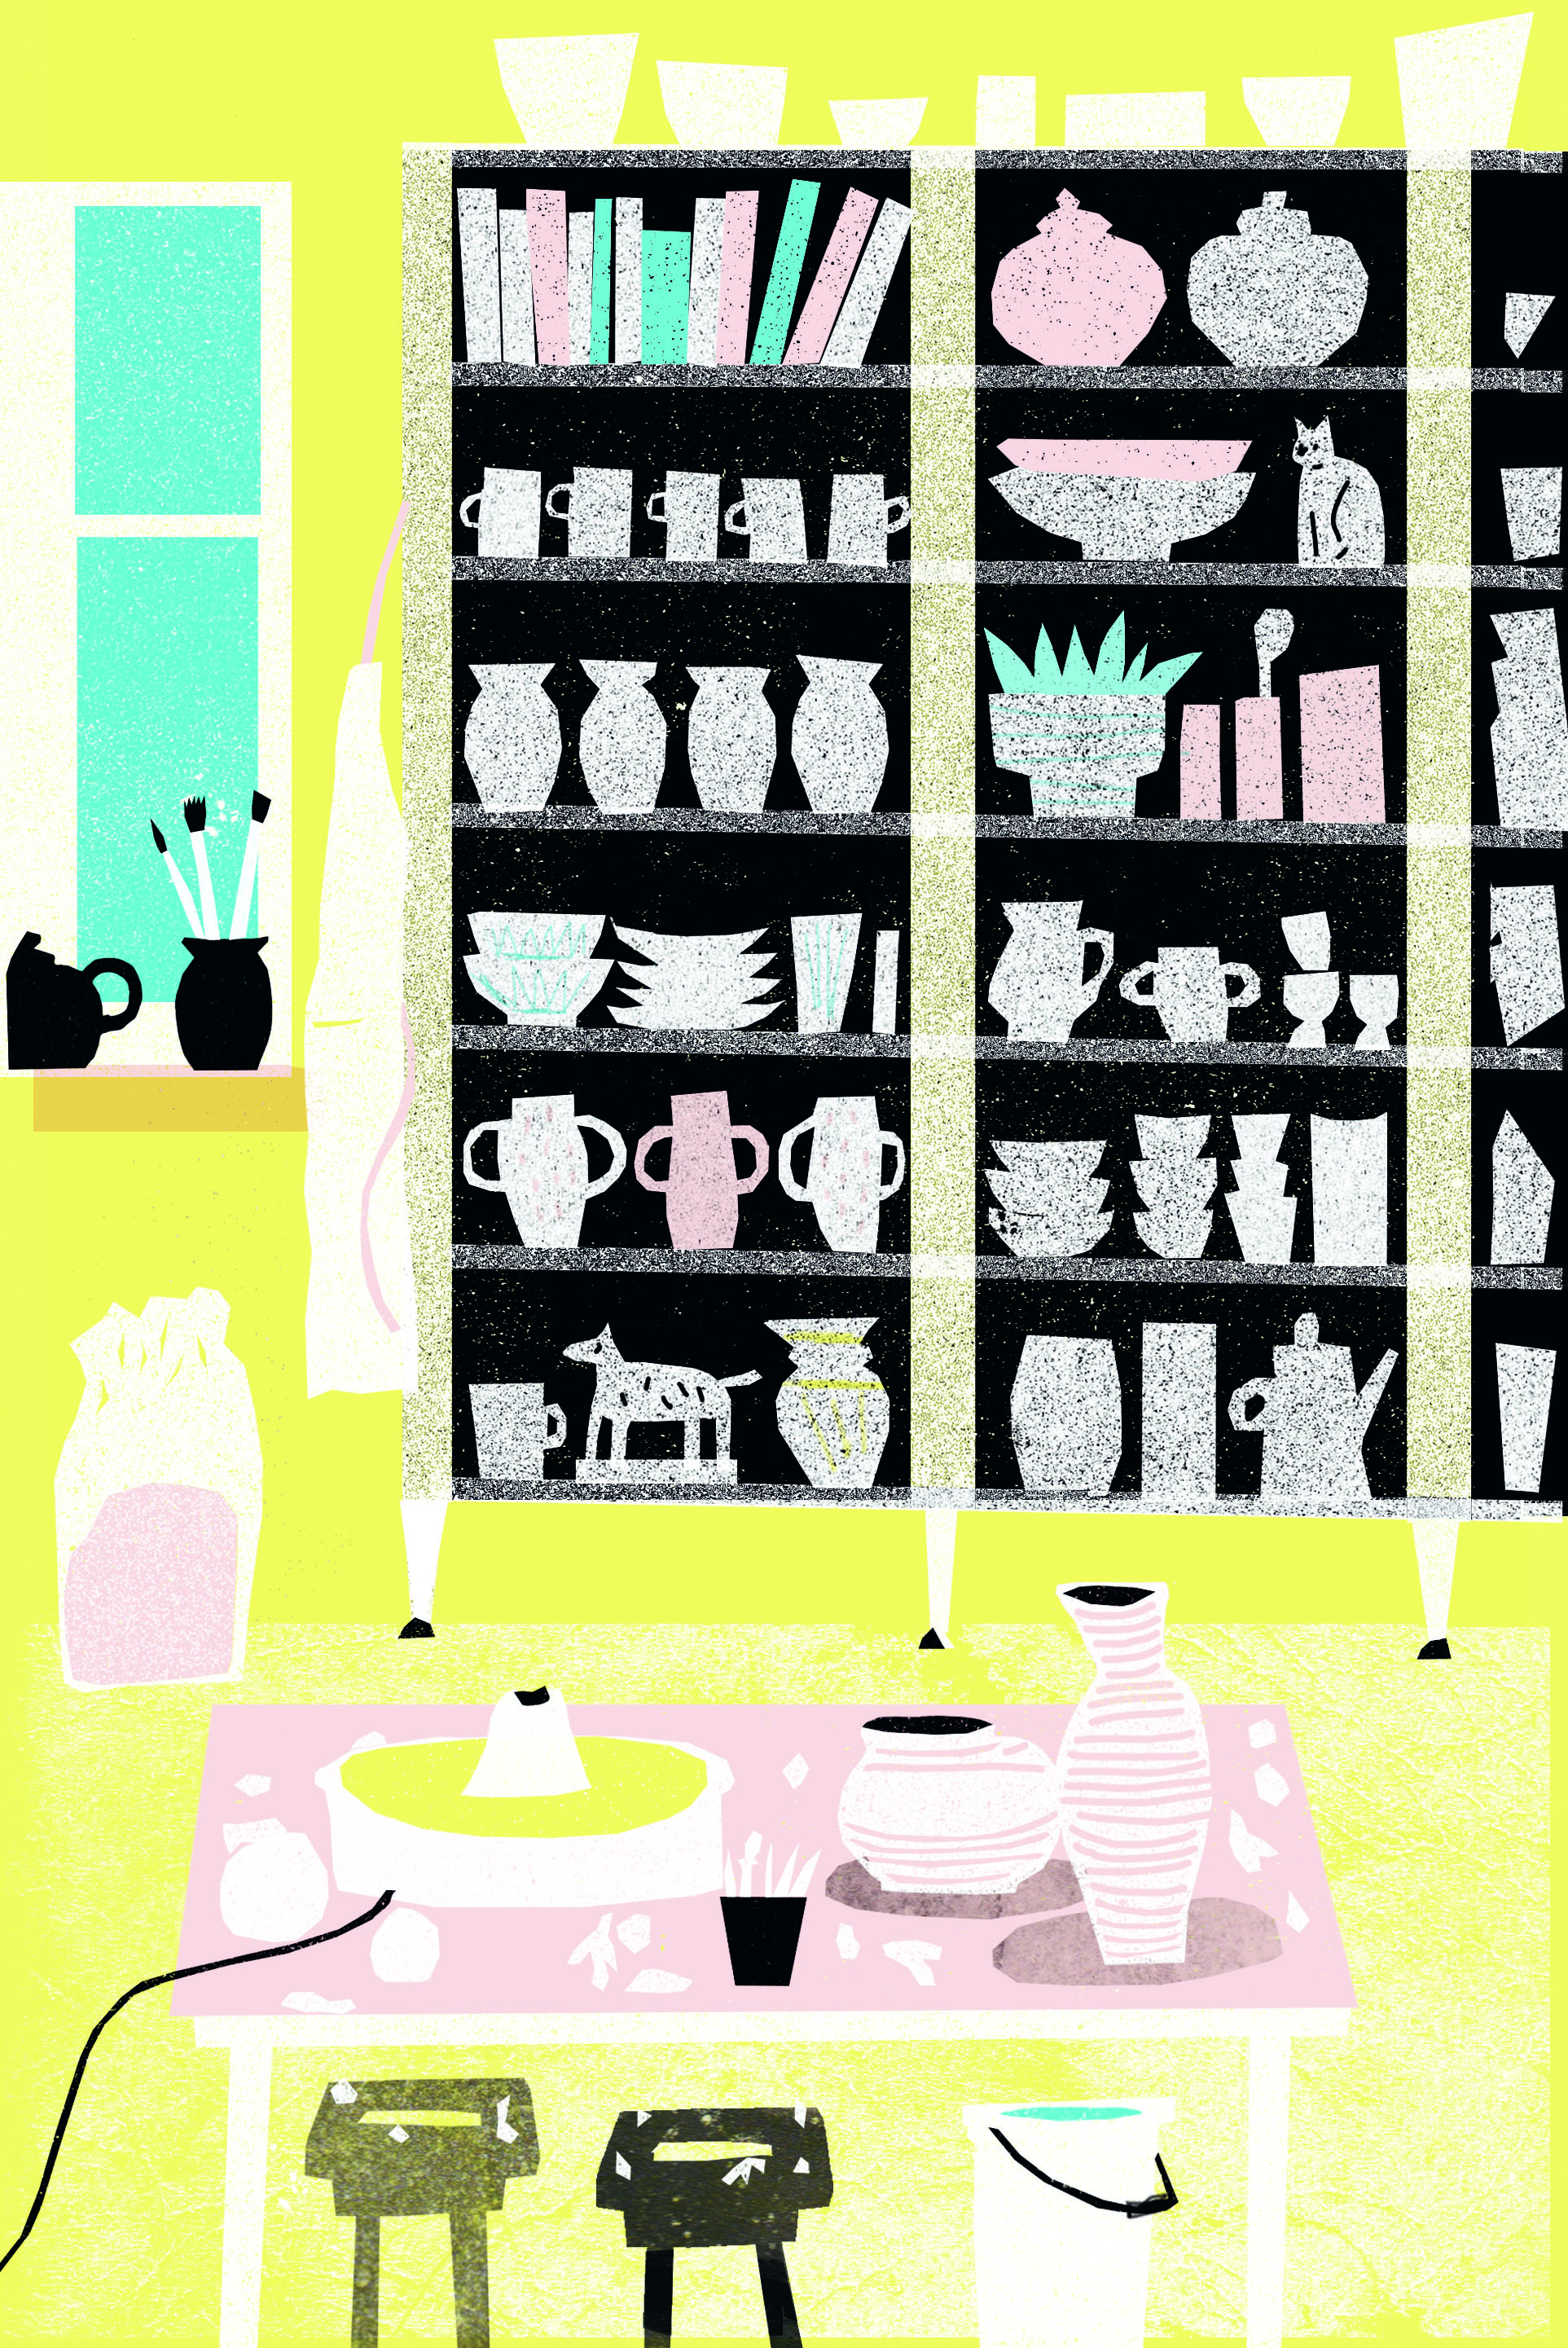 pottery studio illustration by Louise Lockhart for Crafted book